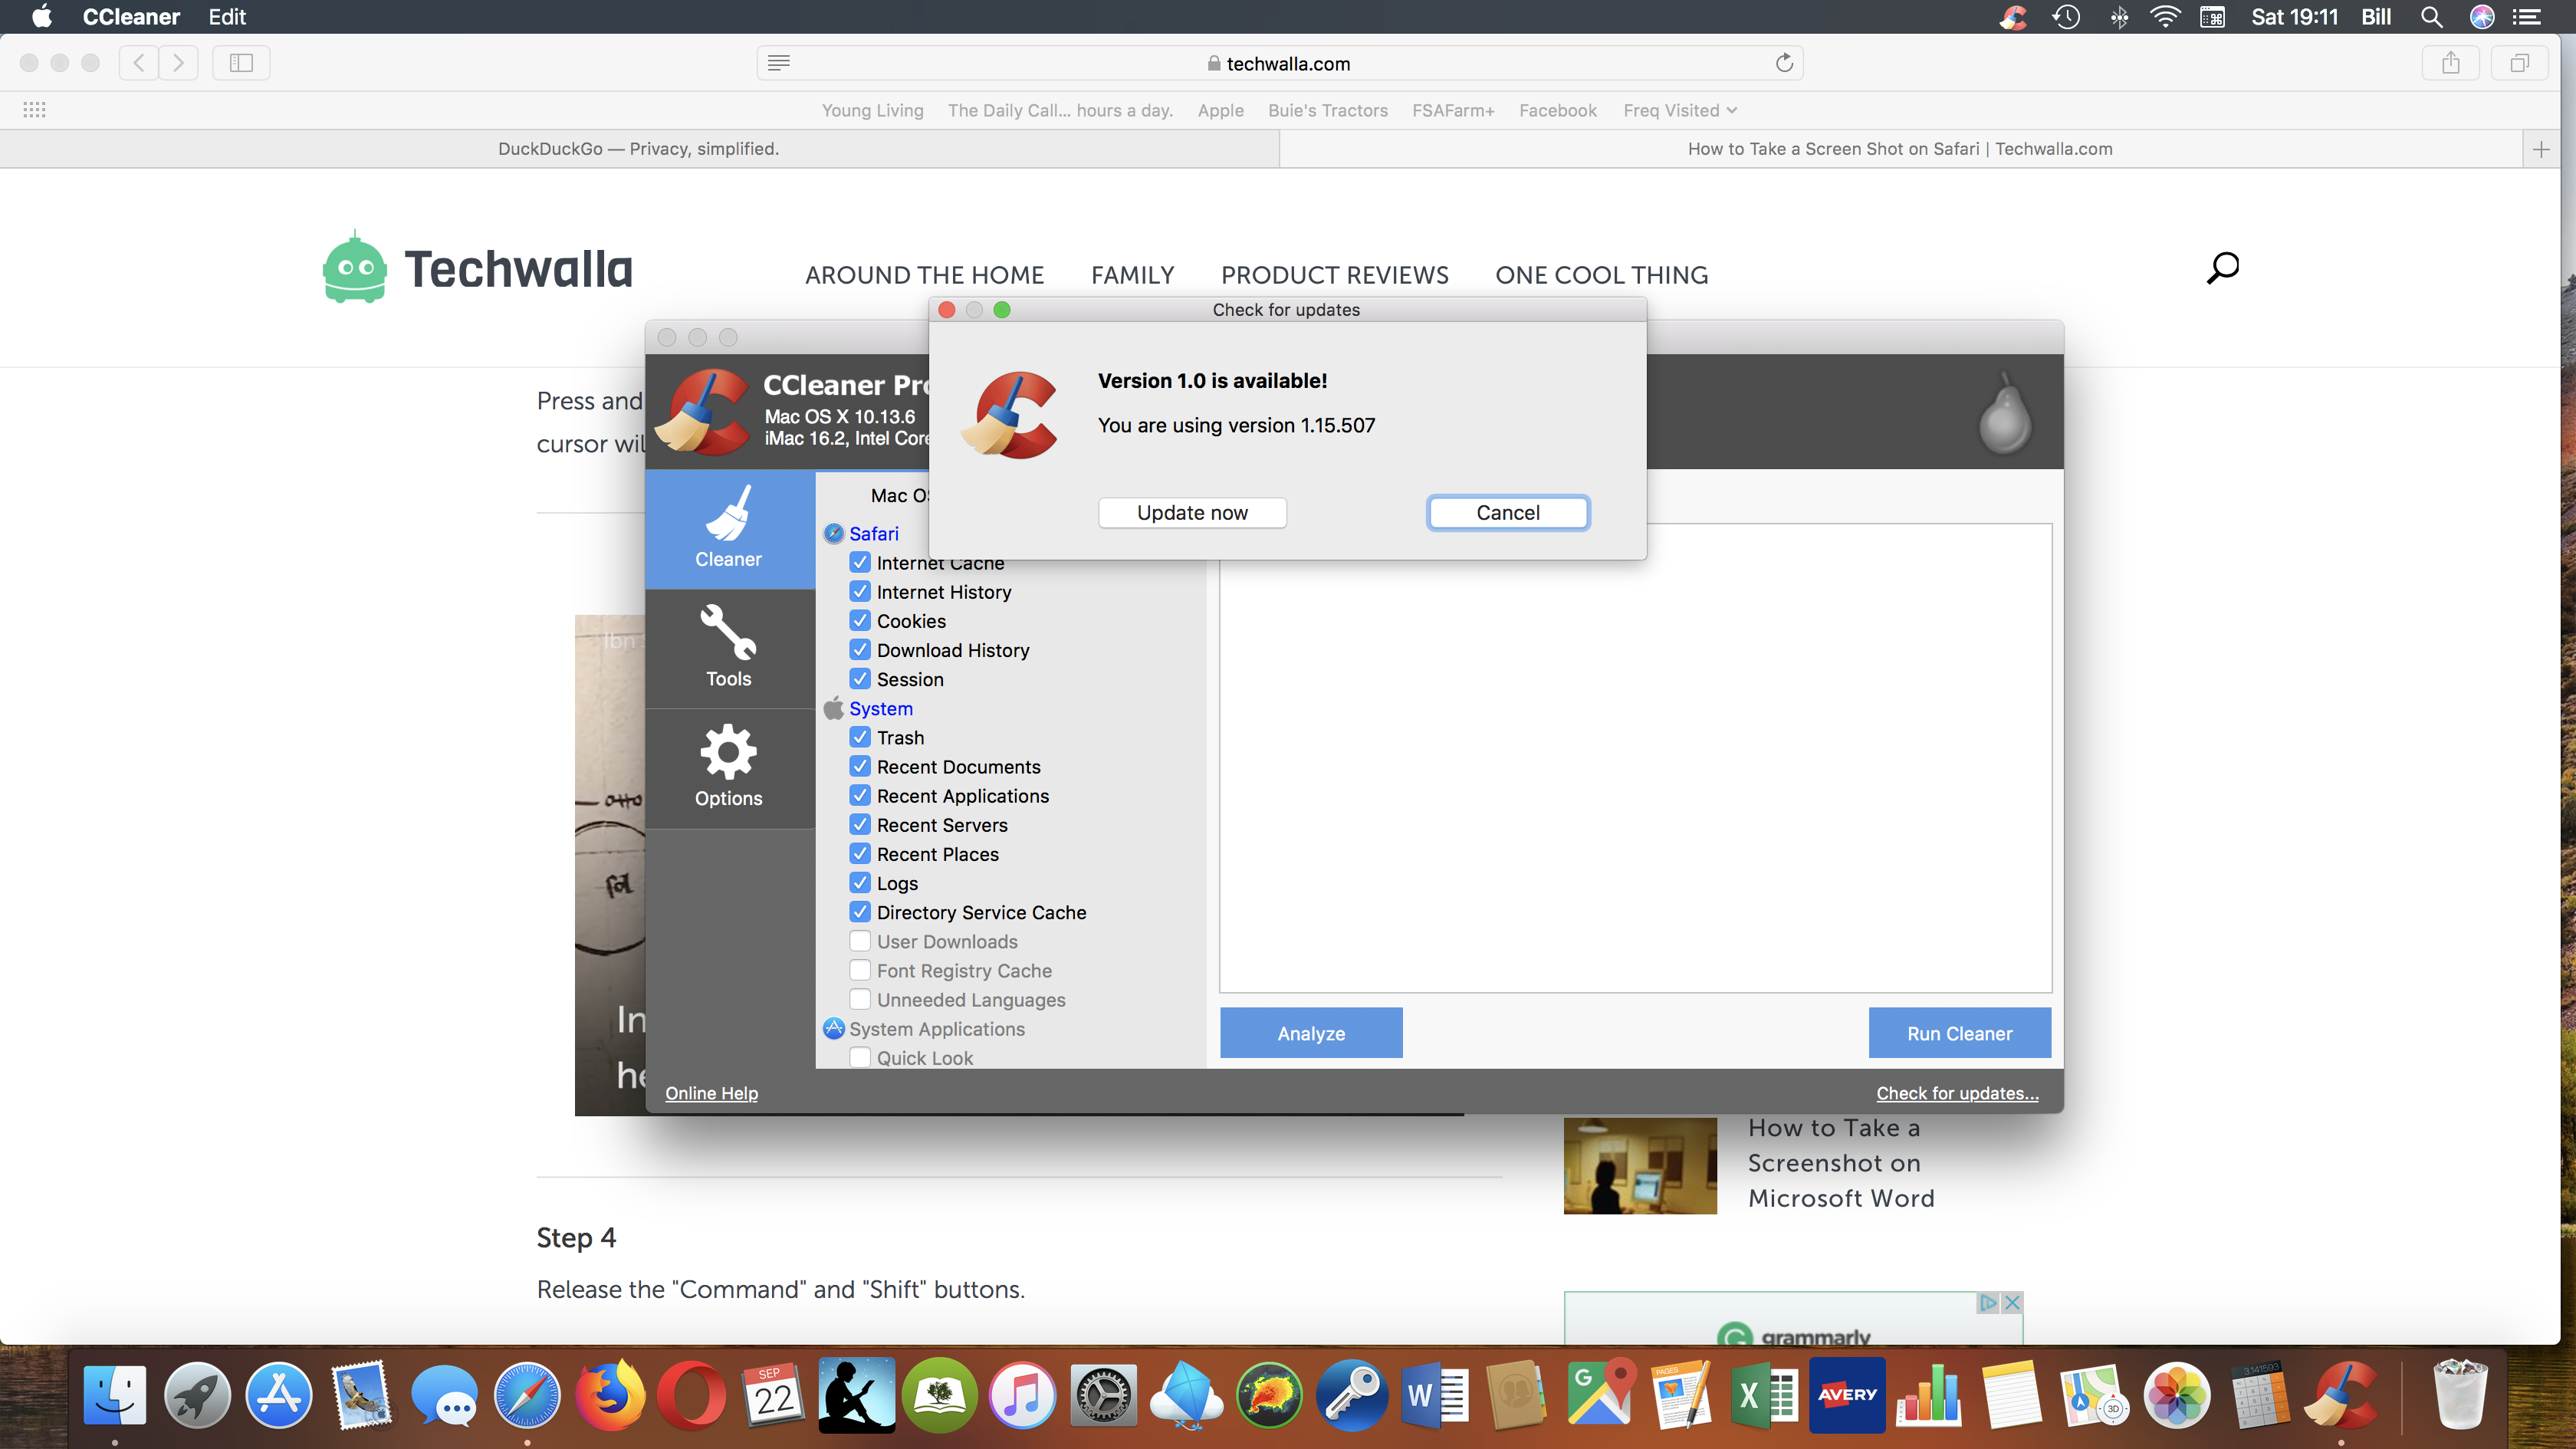 ccleaner for mac doesn